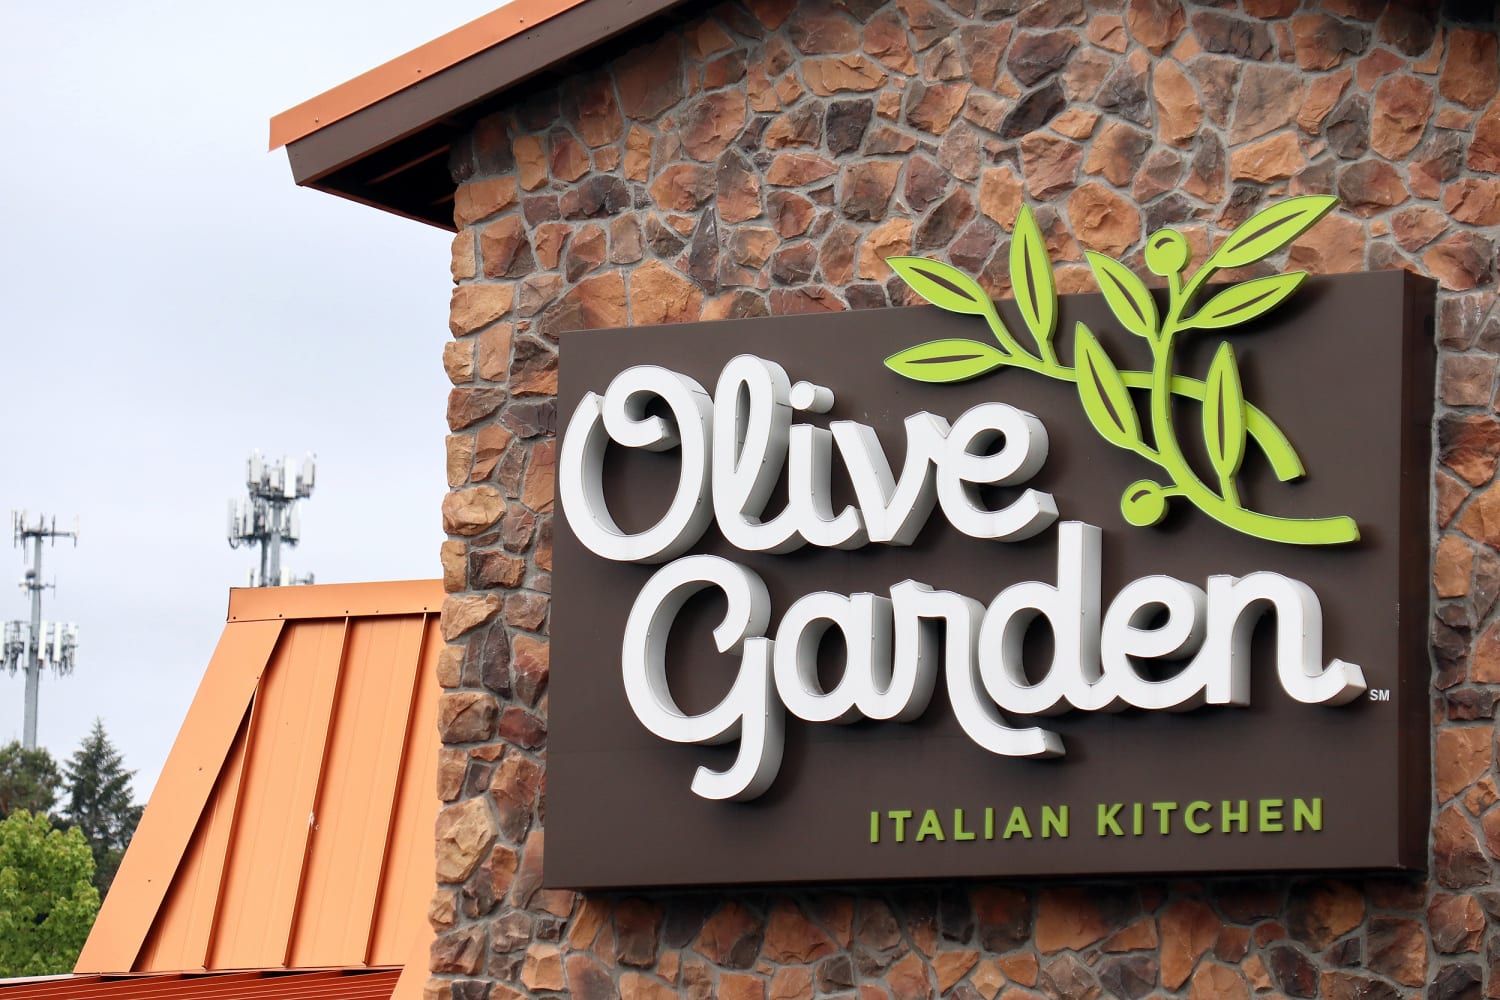 The Daily Dot on X: 'Tell me when': Olive Garden customer goes in for  never-ending pasta and discovers you can take home a cheese grater    / X